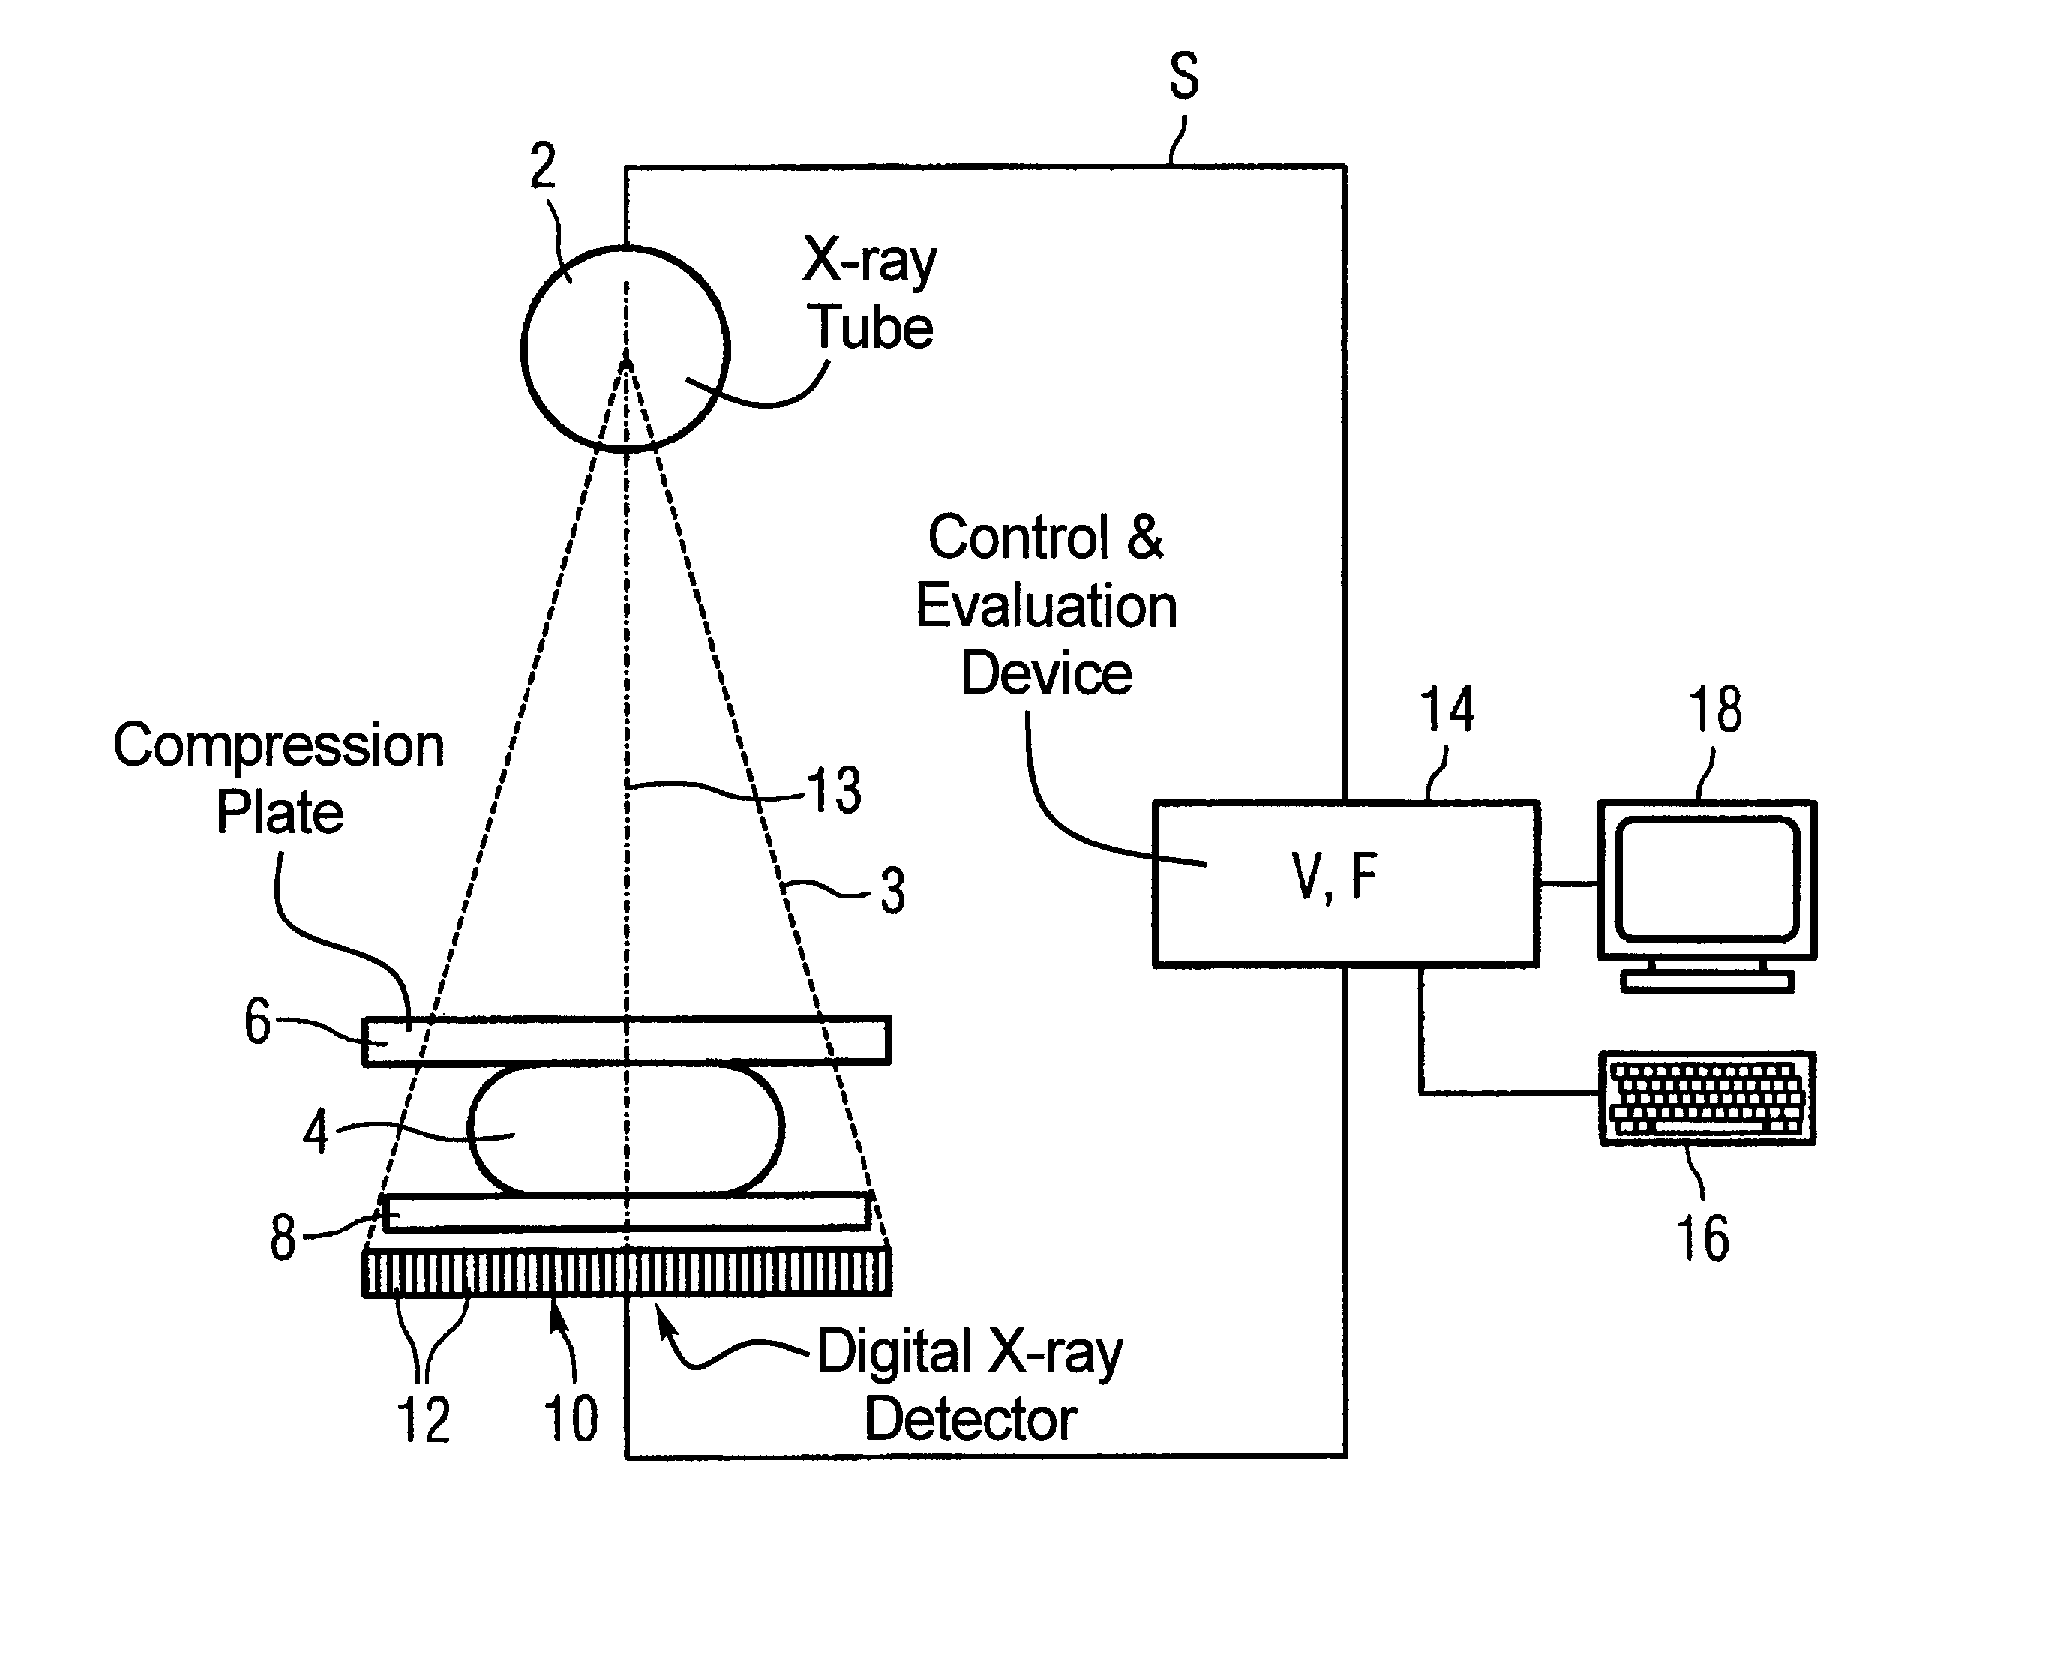 Method and apparatus for generation of a digital x-ray image of an examination subject